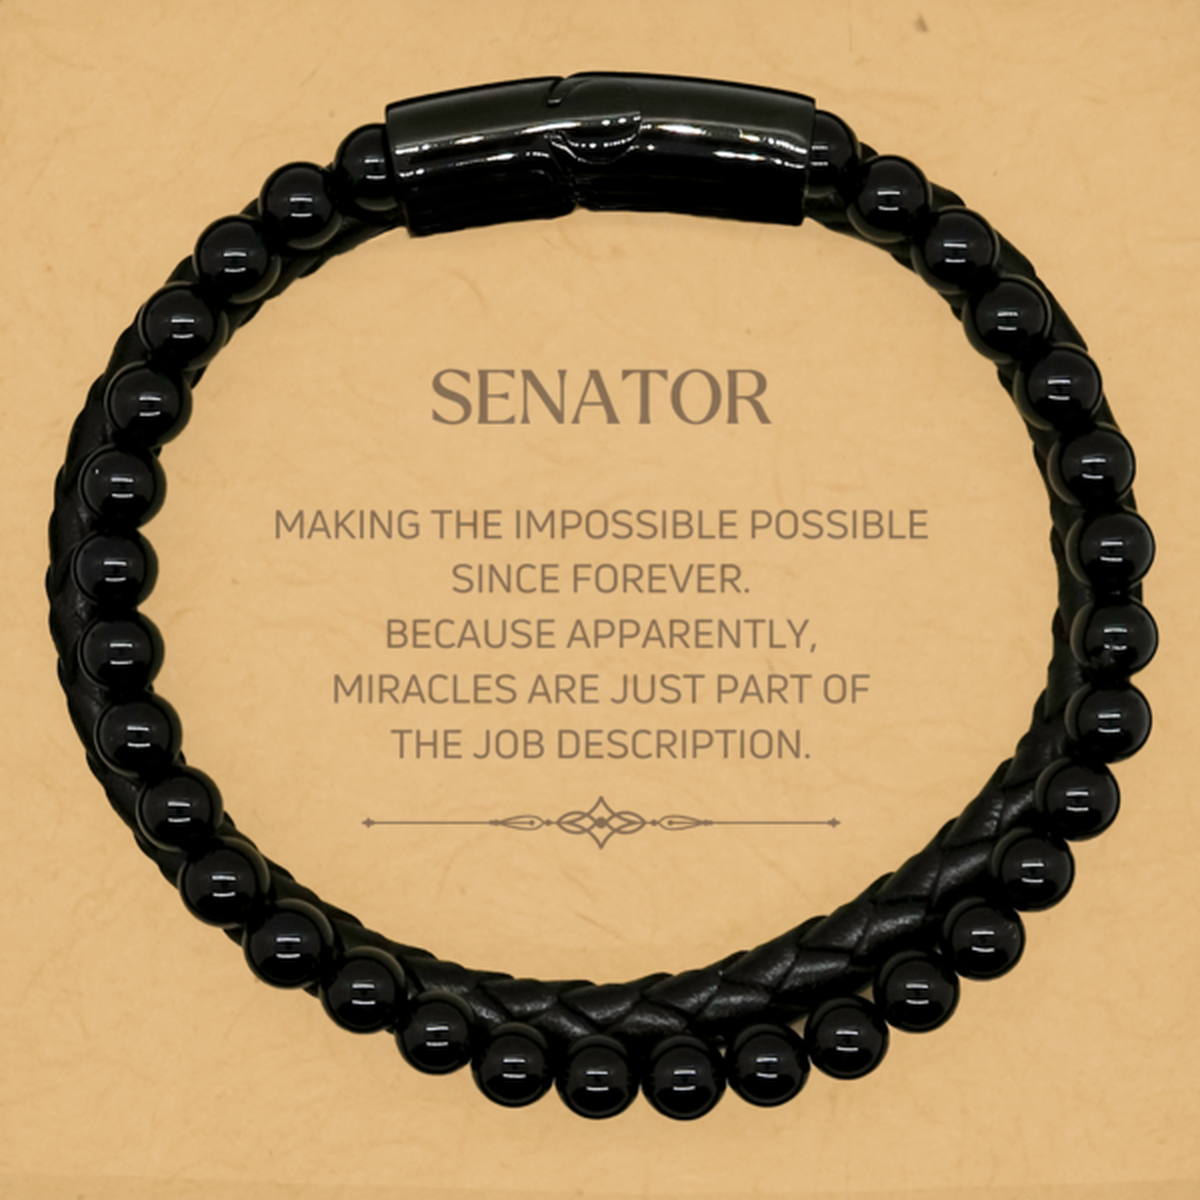 Funny Senator Gifts, Miracles are just part of the job description, Inspirational Birthday Stone Leather Bracelets For Senator, Men, Women, Coworkers, Friends, Boss